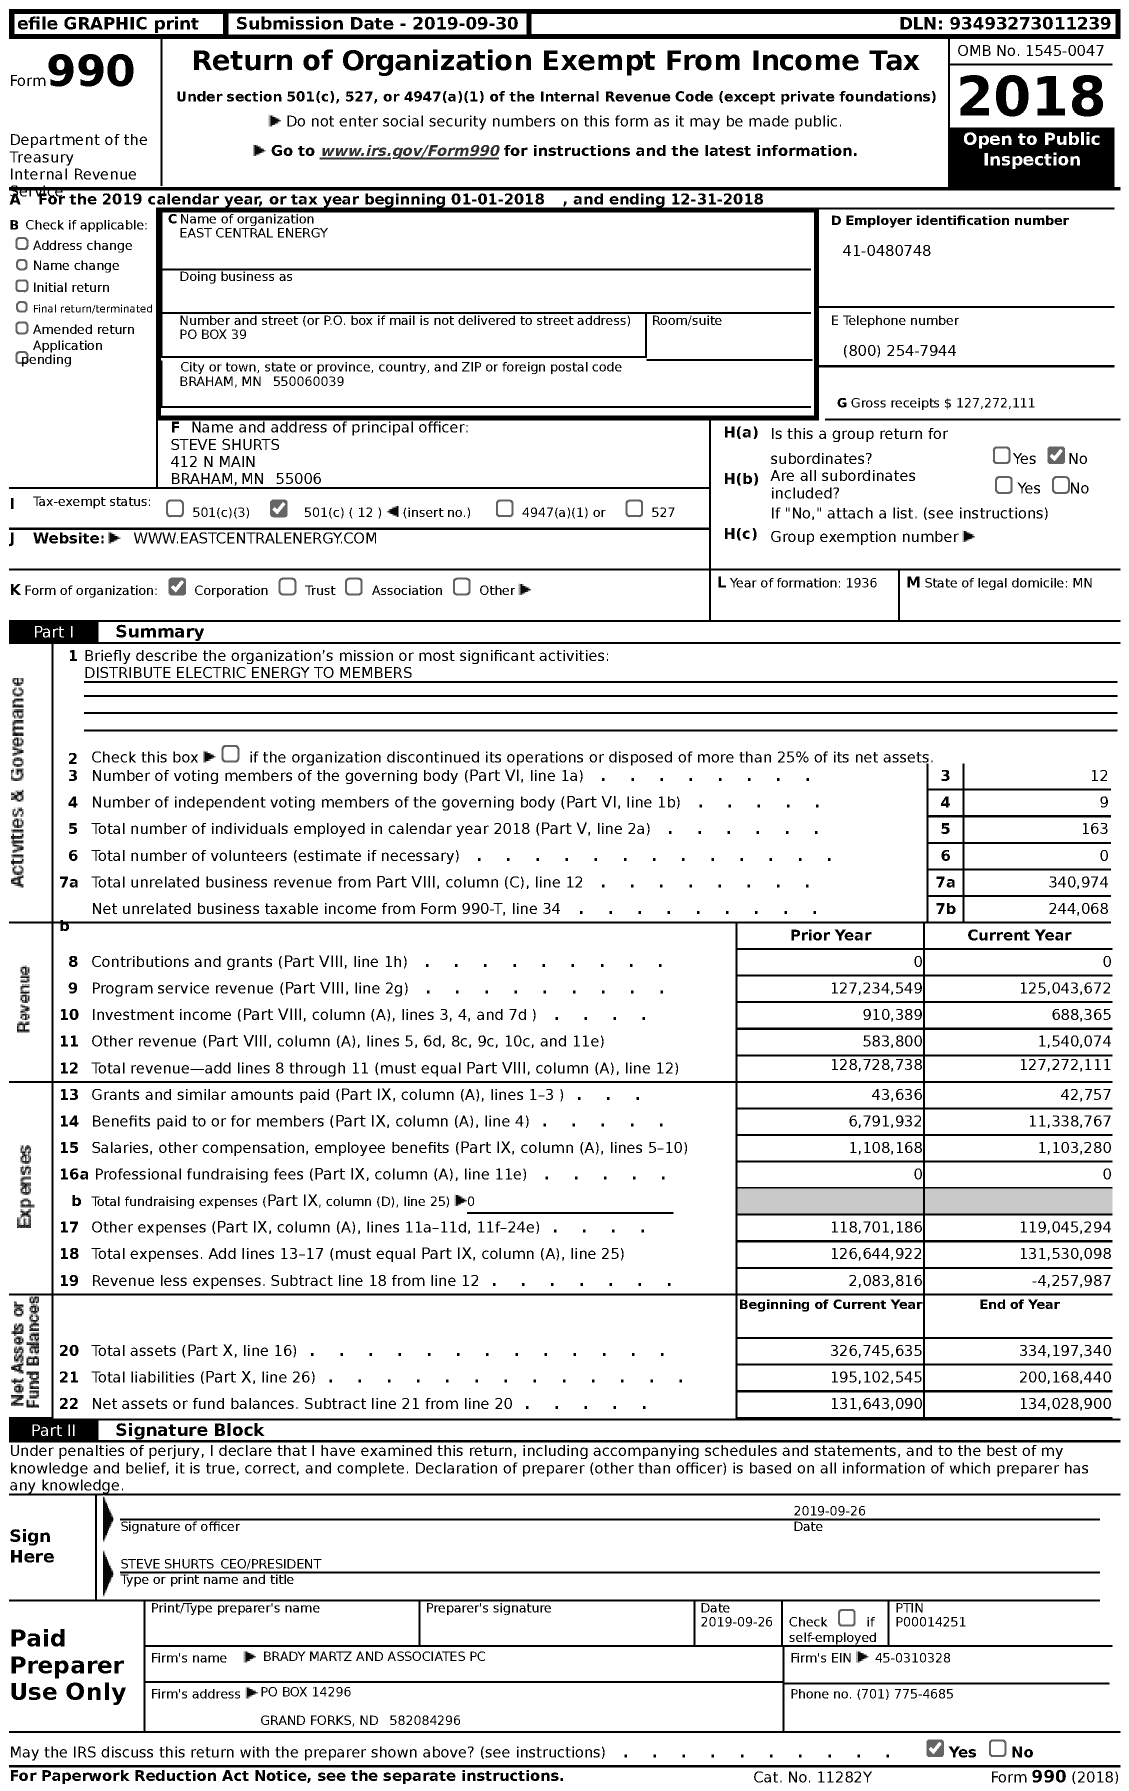 2018 Form 990 For East Central Energy Cause IQ